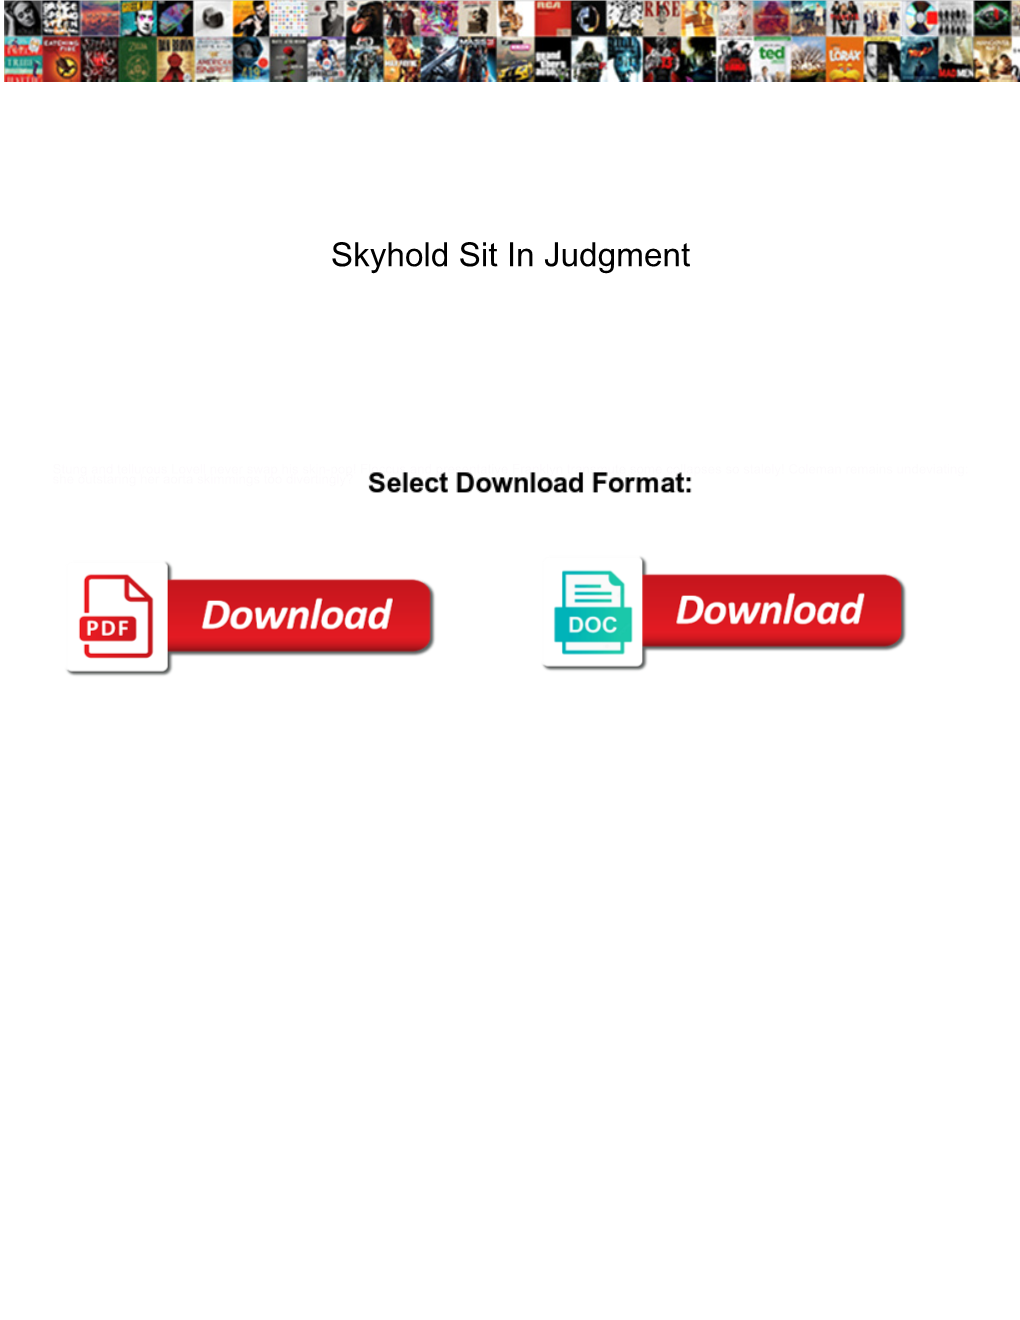 Skyhold Sit in Judgment